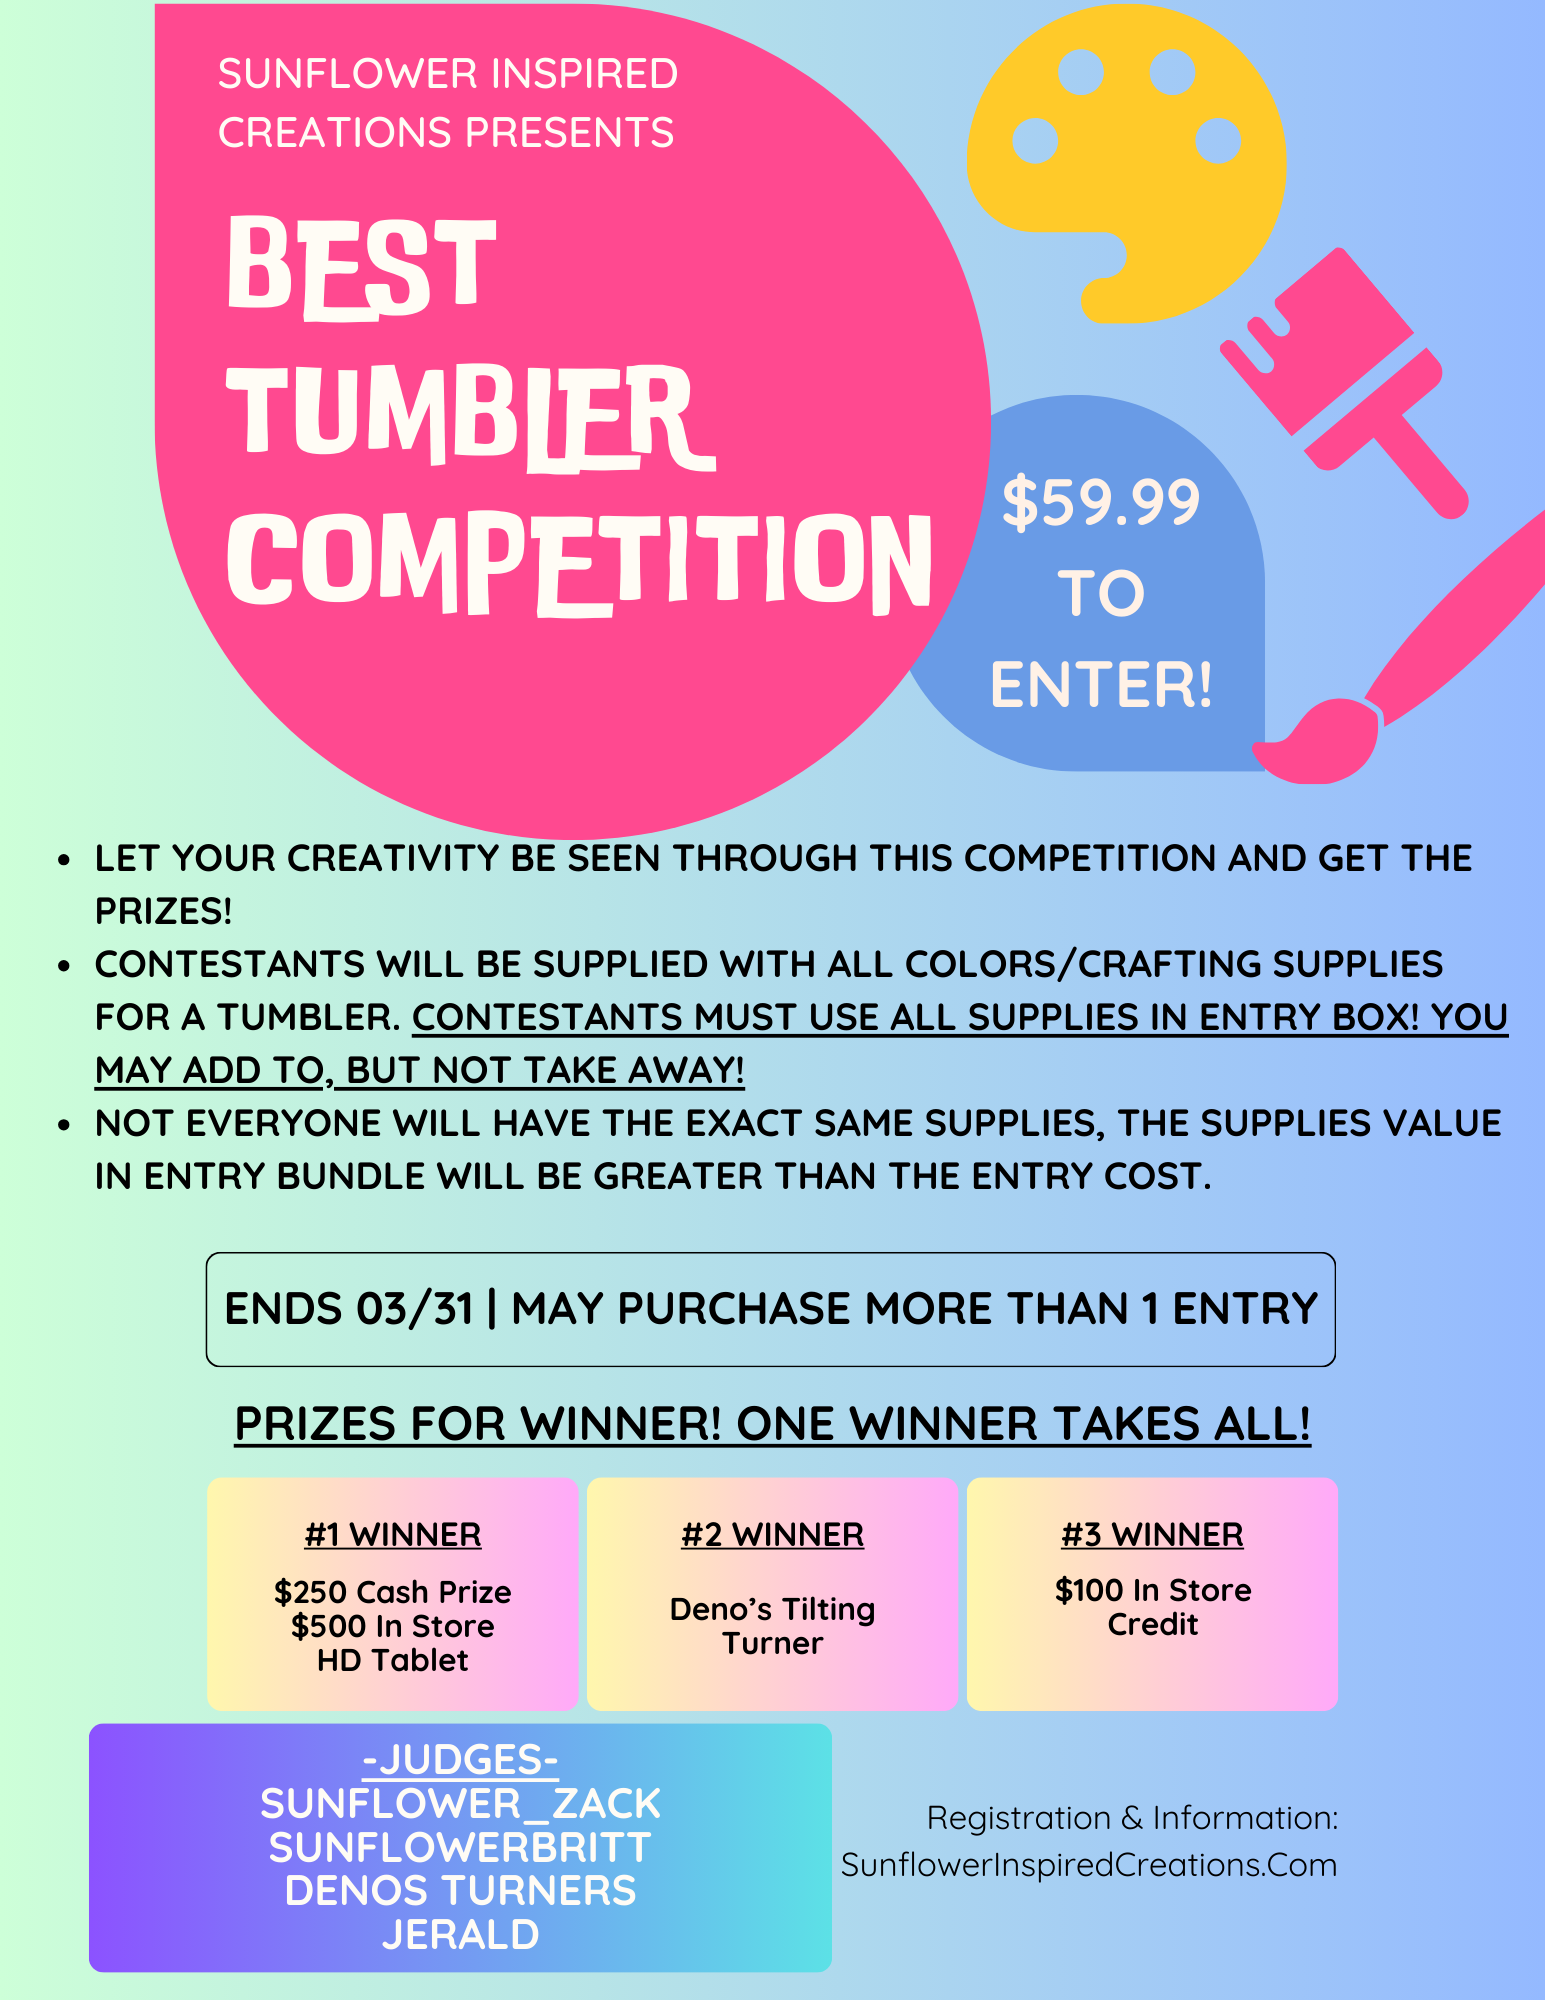 BIGGEST TUMBLER COMPETITION YET!